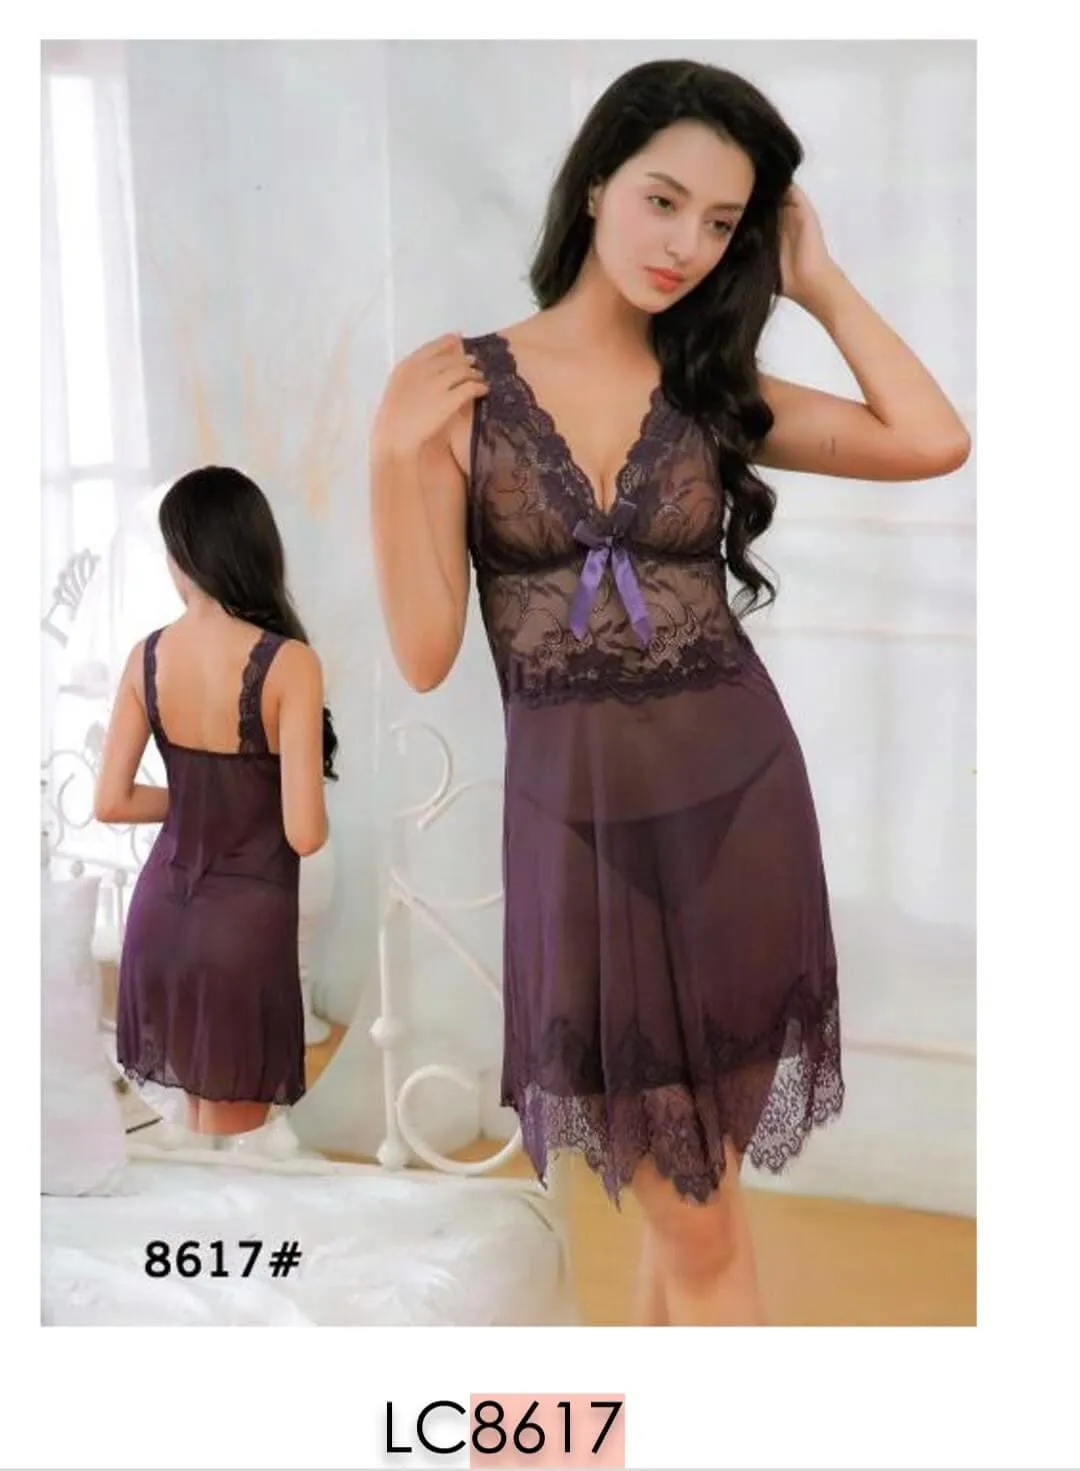 LC8617 BABY DOLL 8617